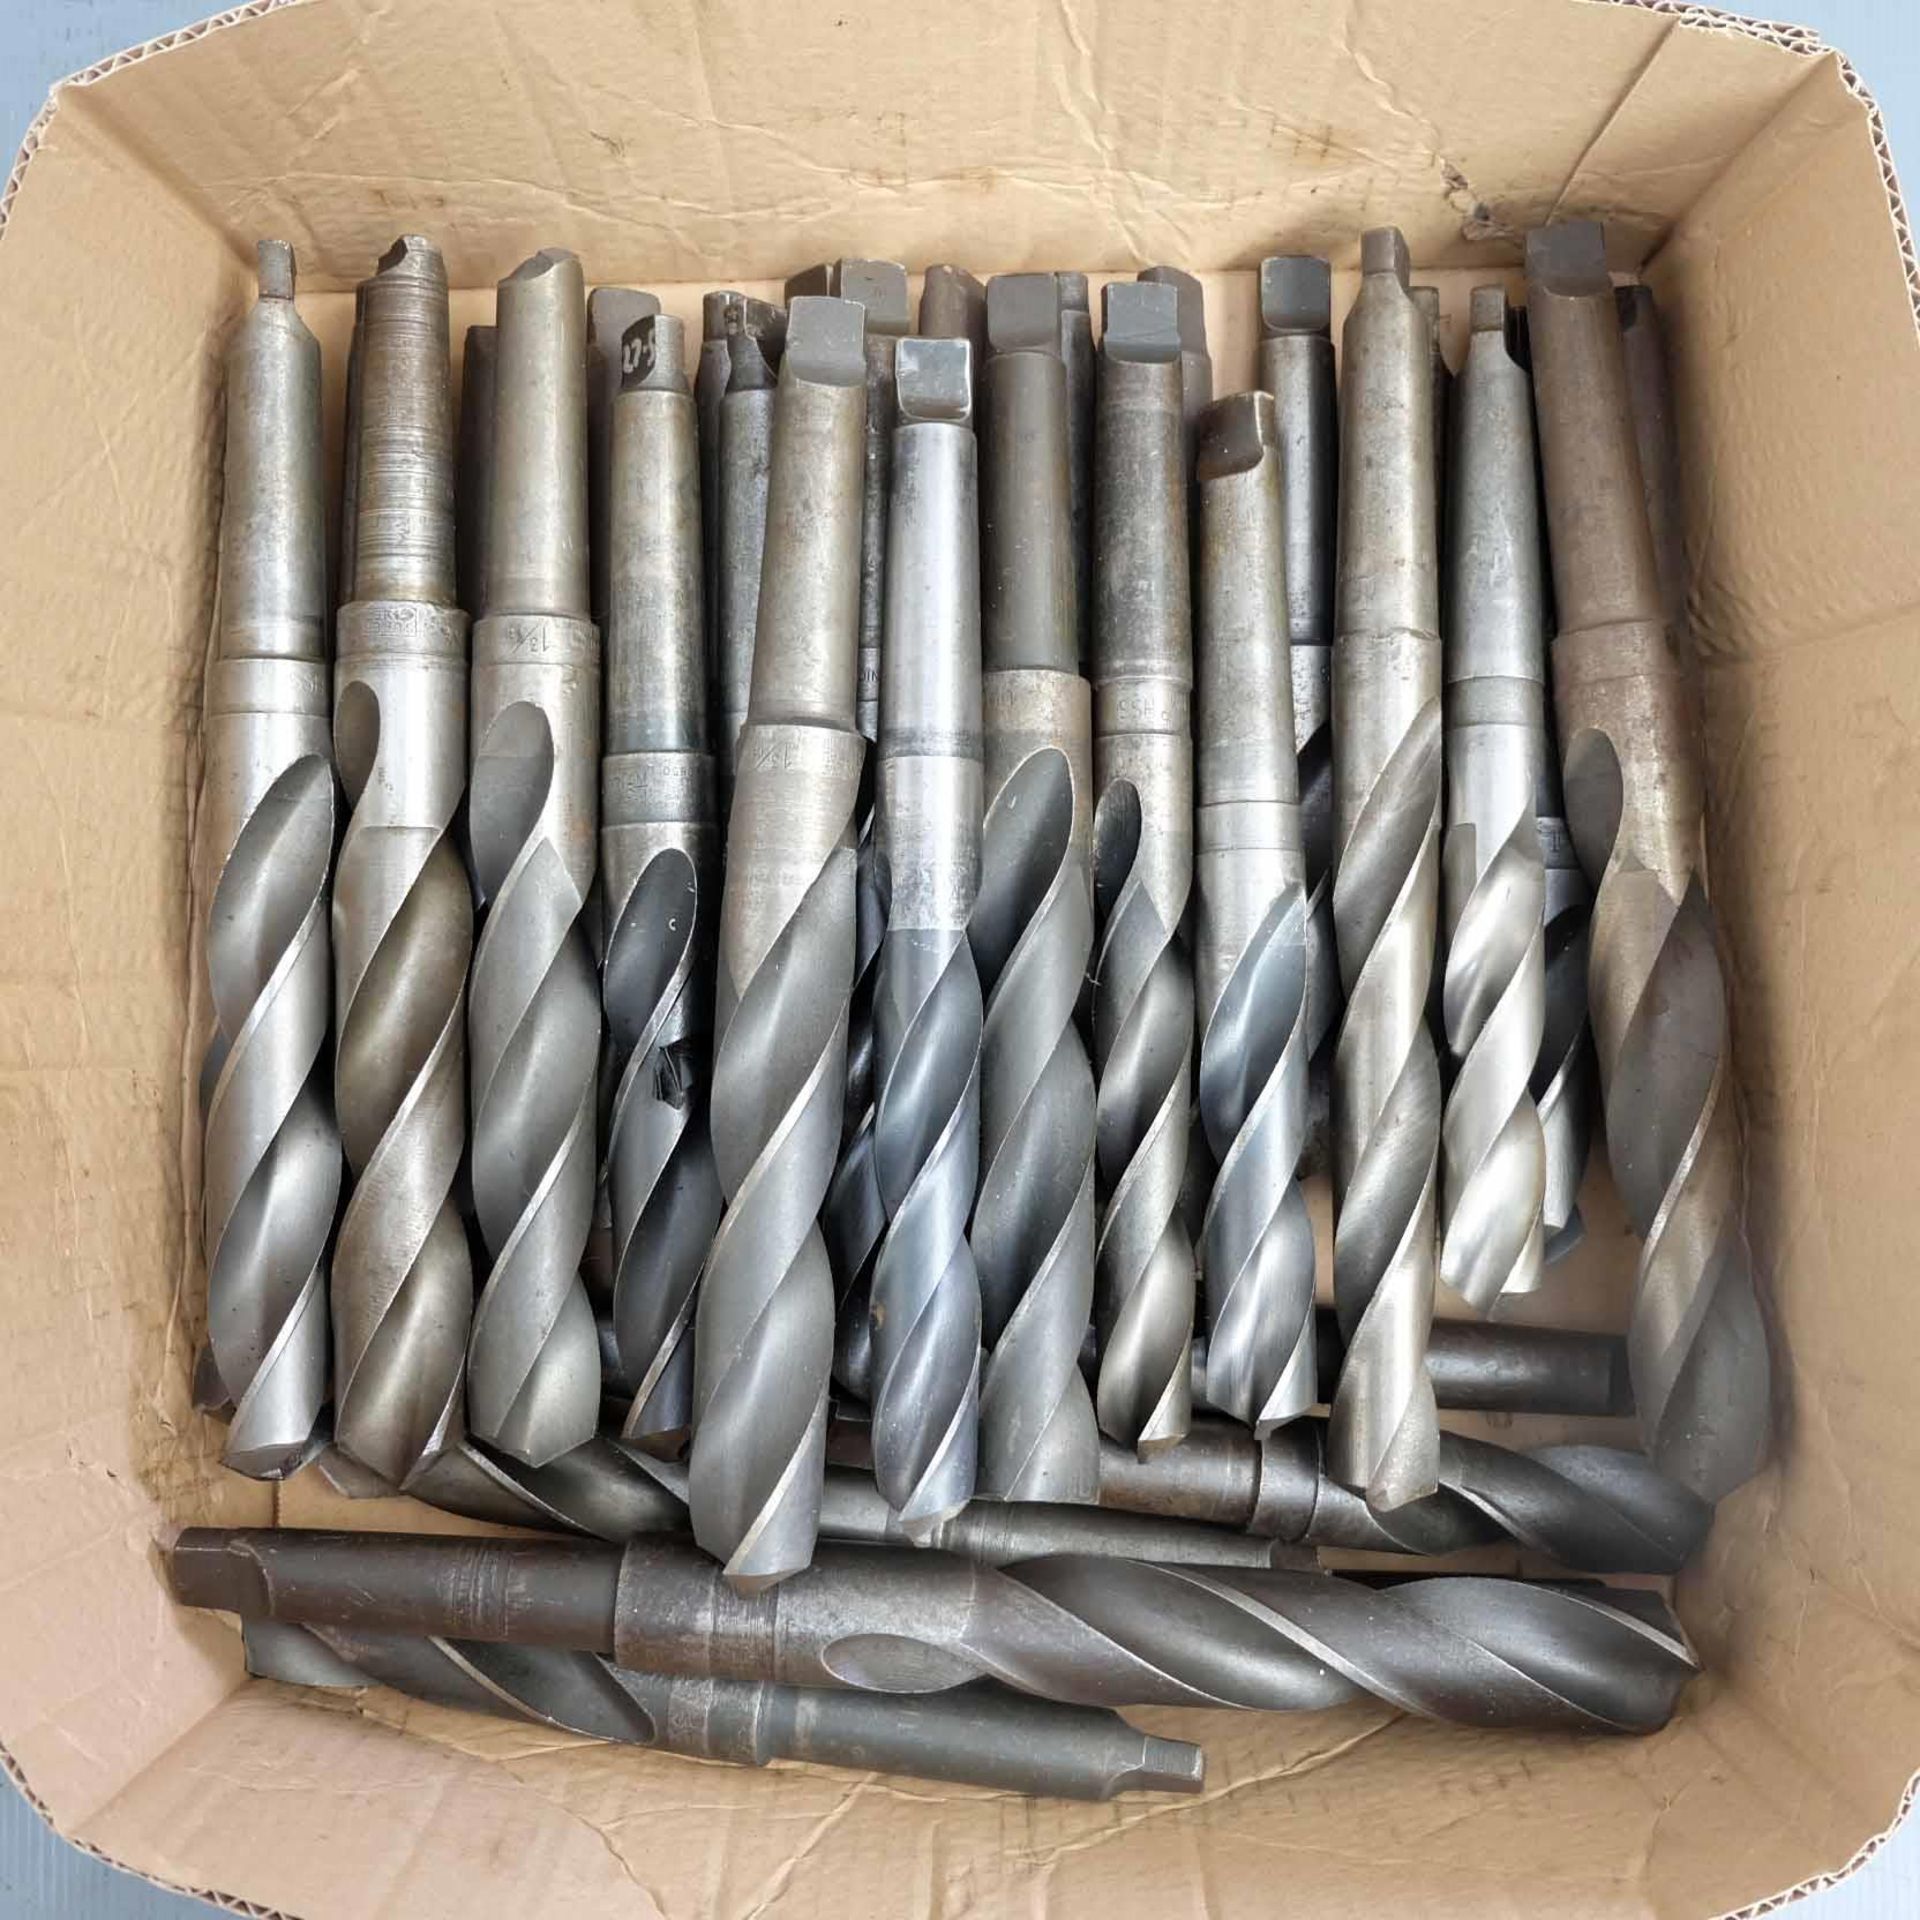 Quantity of 3 MT Drills. Various Metric & Imperial Sizes. - Image 2 of 2